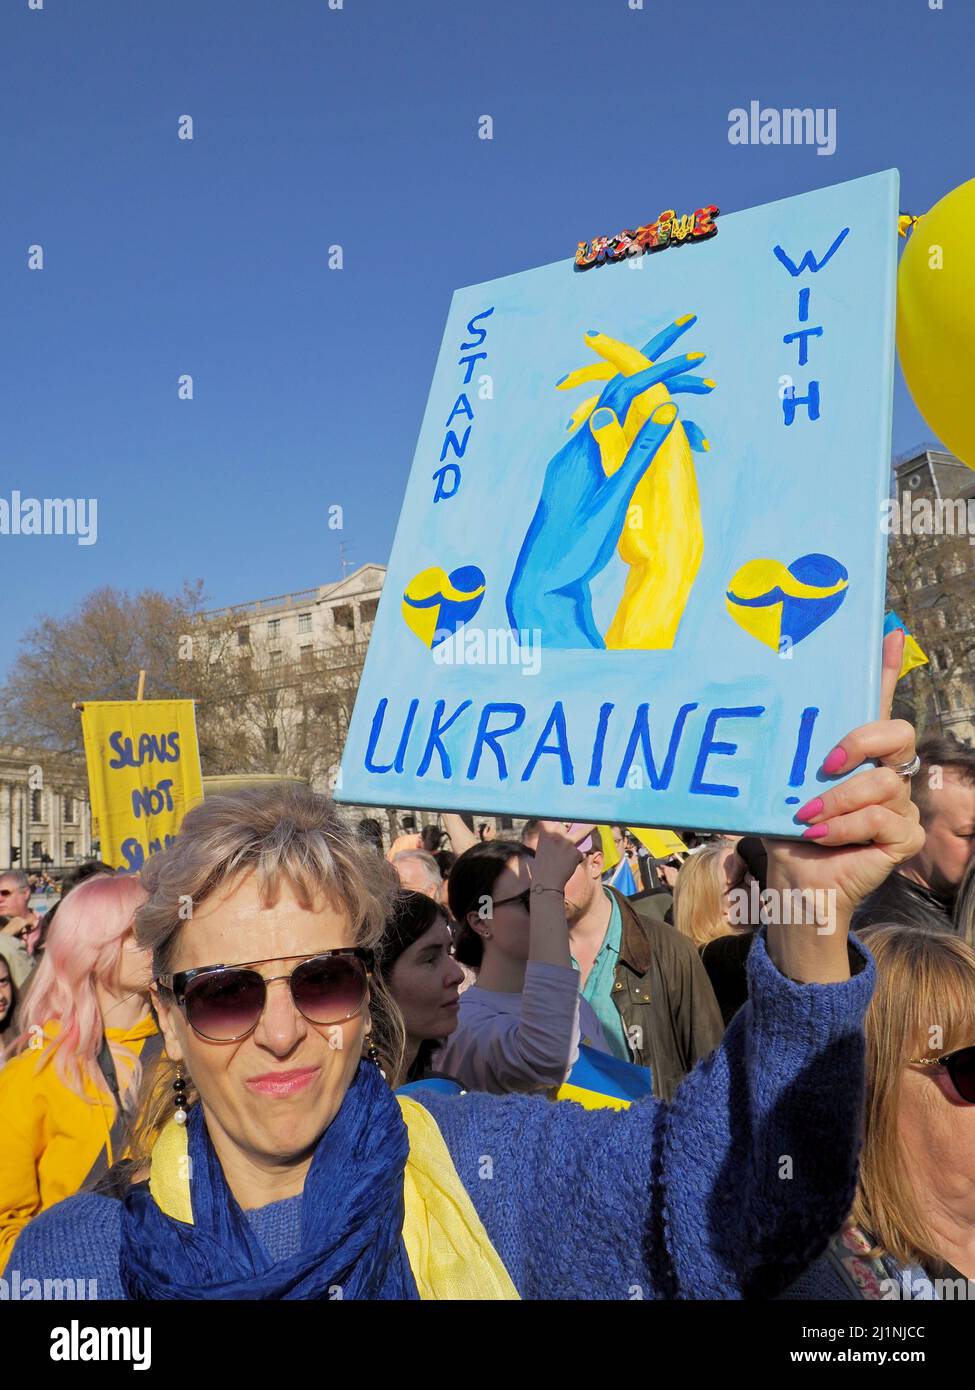 London,UK. 26th Mar 2022. A great march of solidarity with UKRAINE in LONDON.  Mayor of London Sadiq Khan leading the March The 31st day of Russia's invasion of Ukraine. 'The future of Ukraine should not be decided by Putin, but by the people of Ukraine themselves.' #StandWithUkraine #SaveUkraine  Credit: Marcin Libera/Alamy Live News Stock Photo